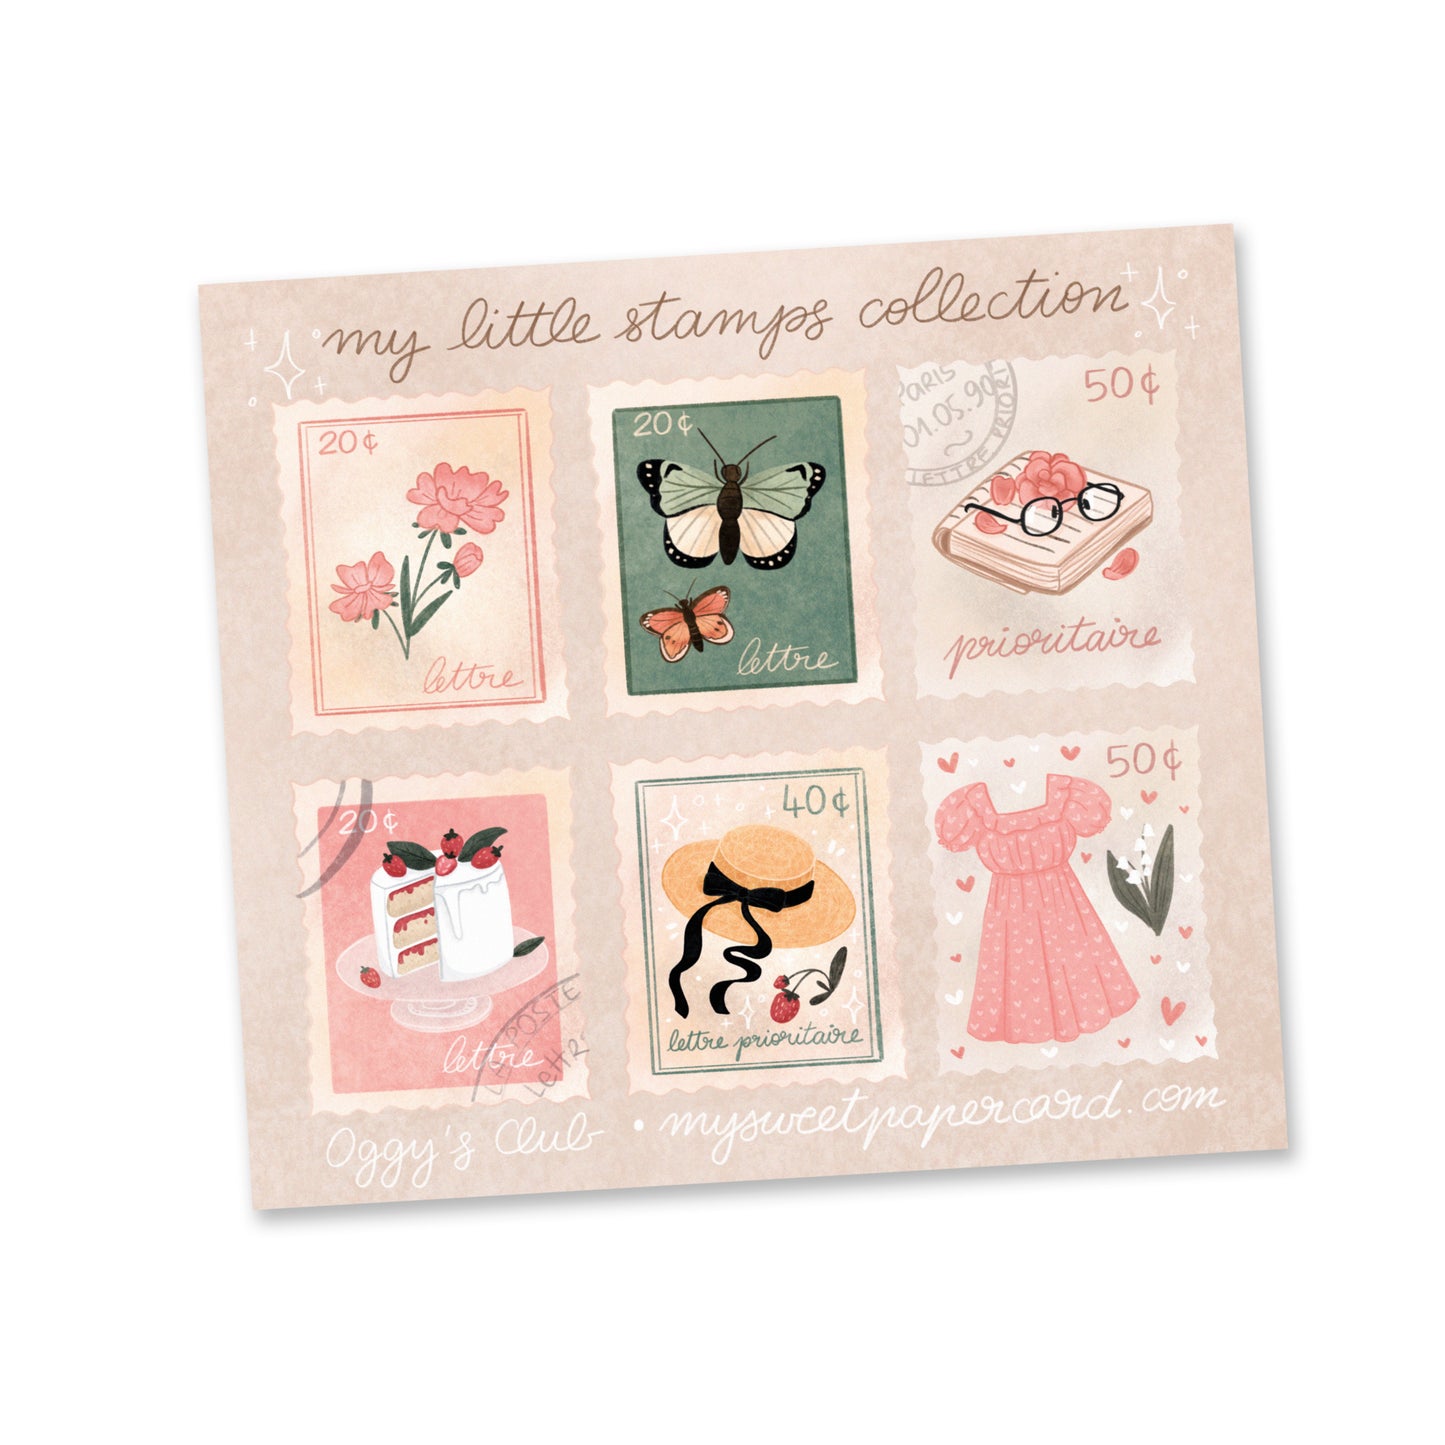 Oggy's Club - Cottagecore Stamps - Small Stickers Sheet